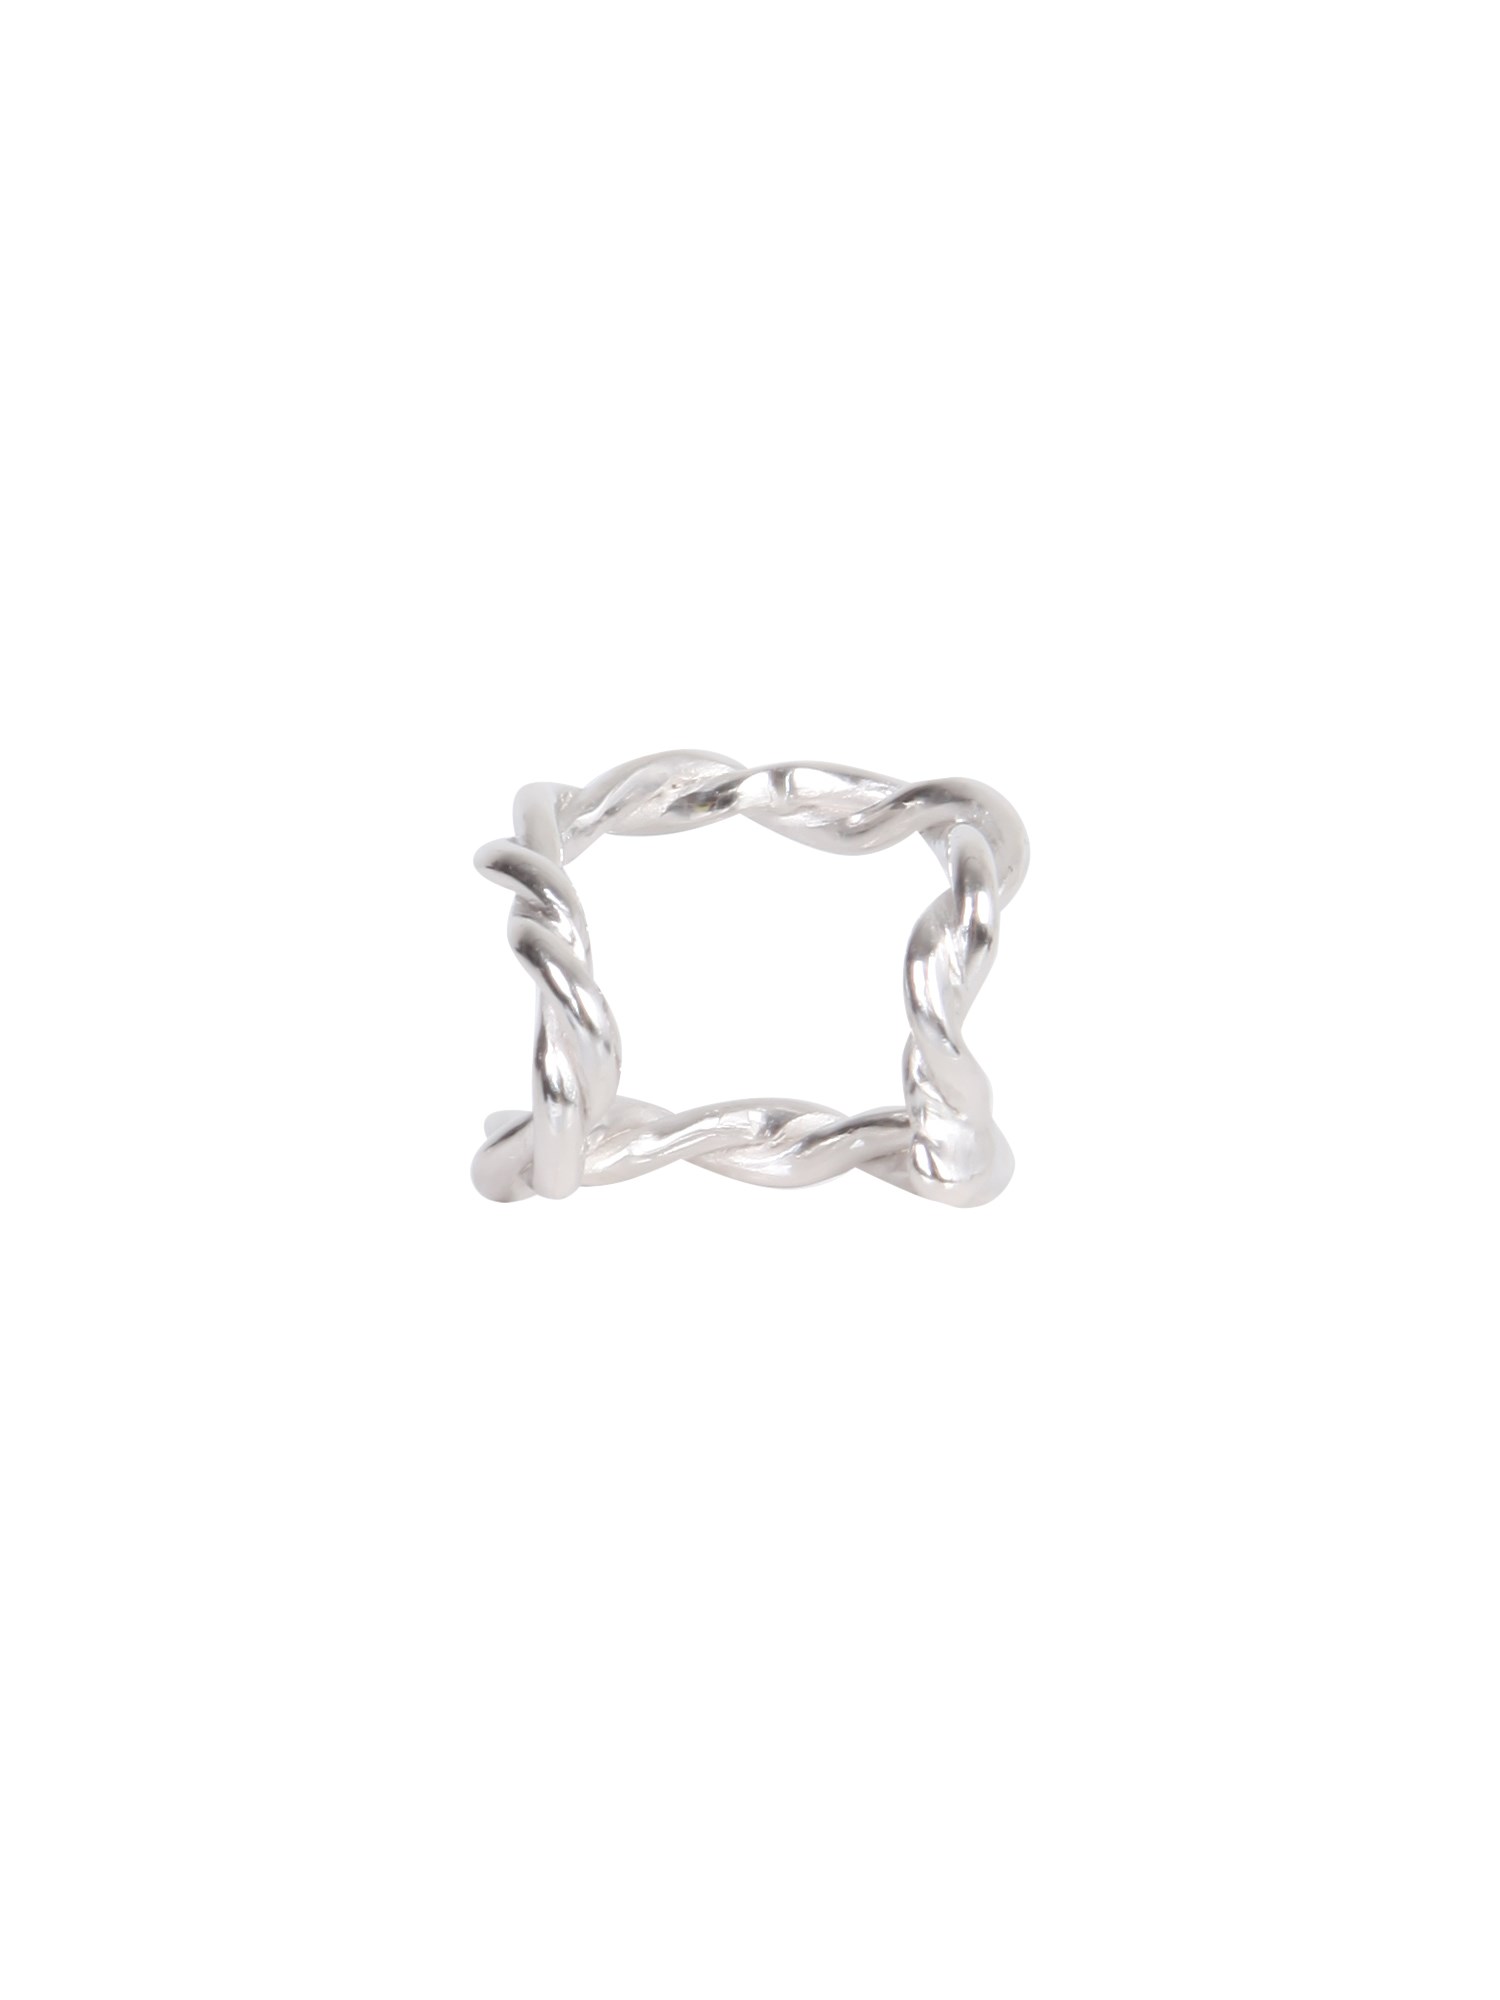 ilaria ludovici jewelry hold me ring